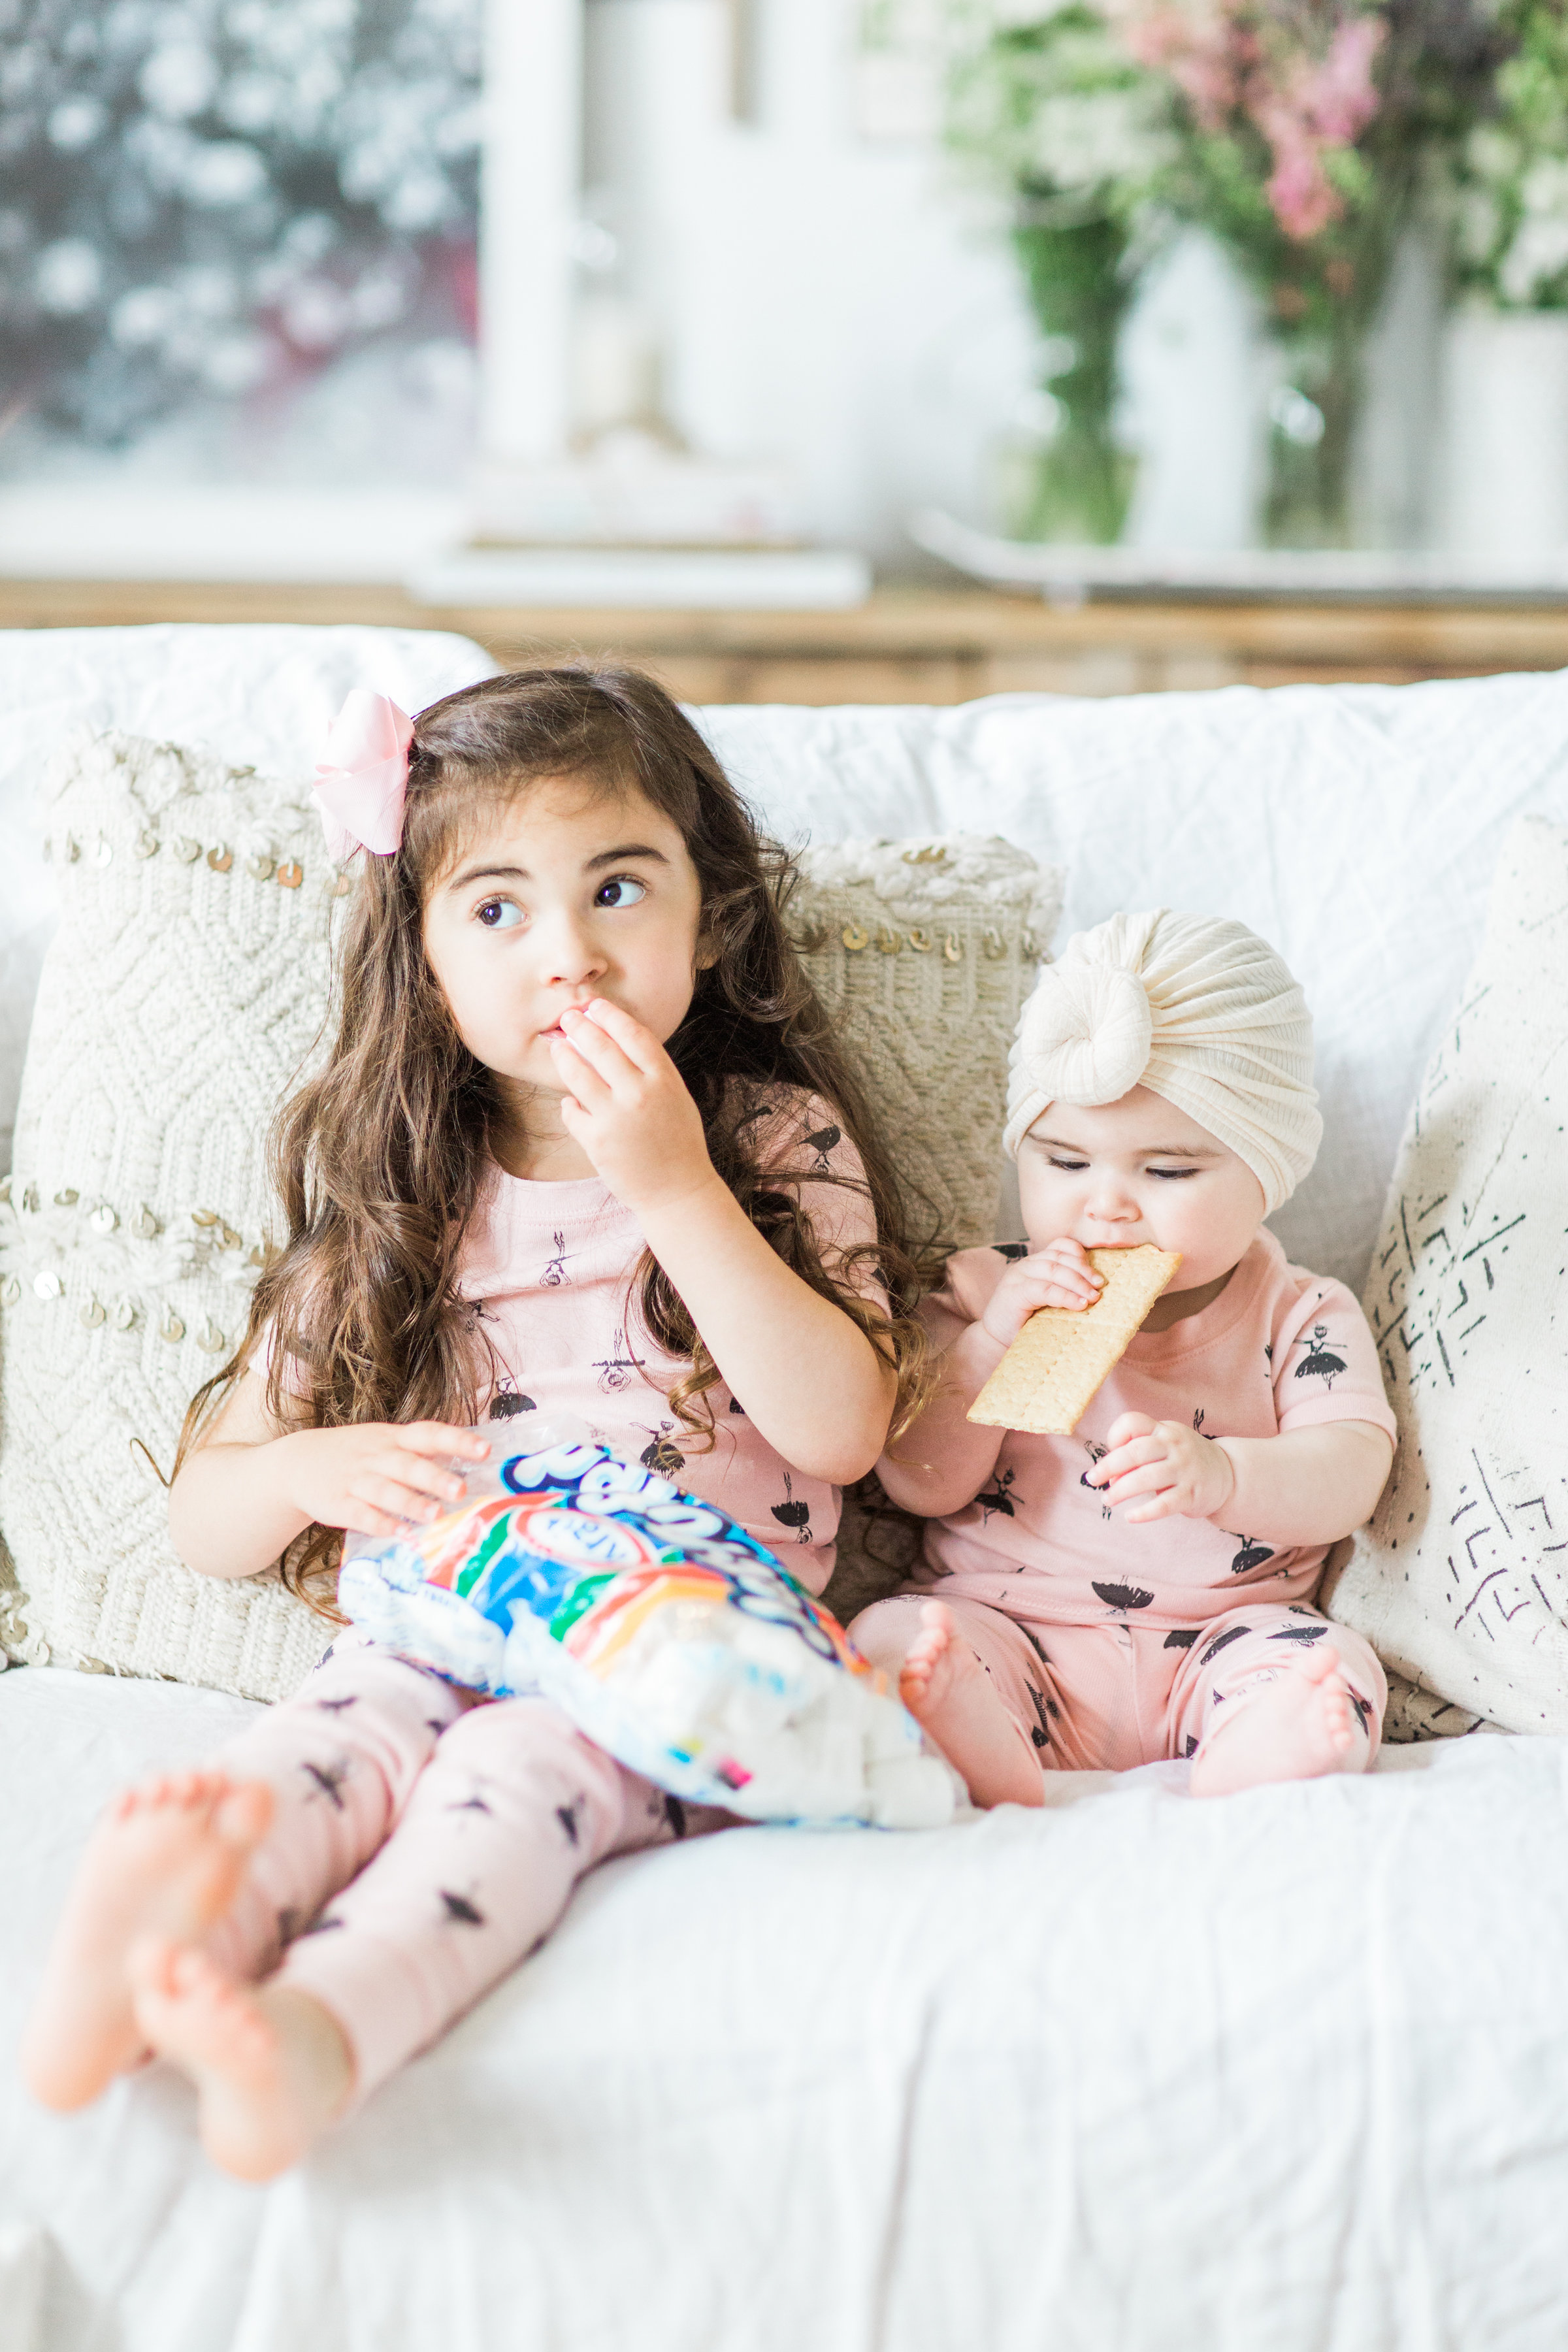 I'm sharing a big 'ol dose of cuteness; a.k.a., the behind-the-scenes of the girls trying s'mores for the first time (and caught on camera) from our family movie night! #smores #matchingpajamas #movienight #familyfun #smoresparty | glitterinc.com | @glitterinc